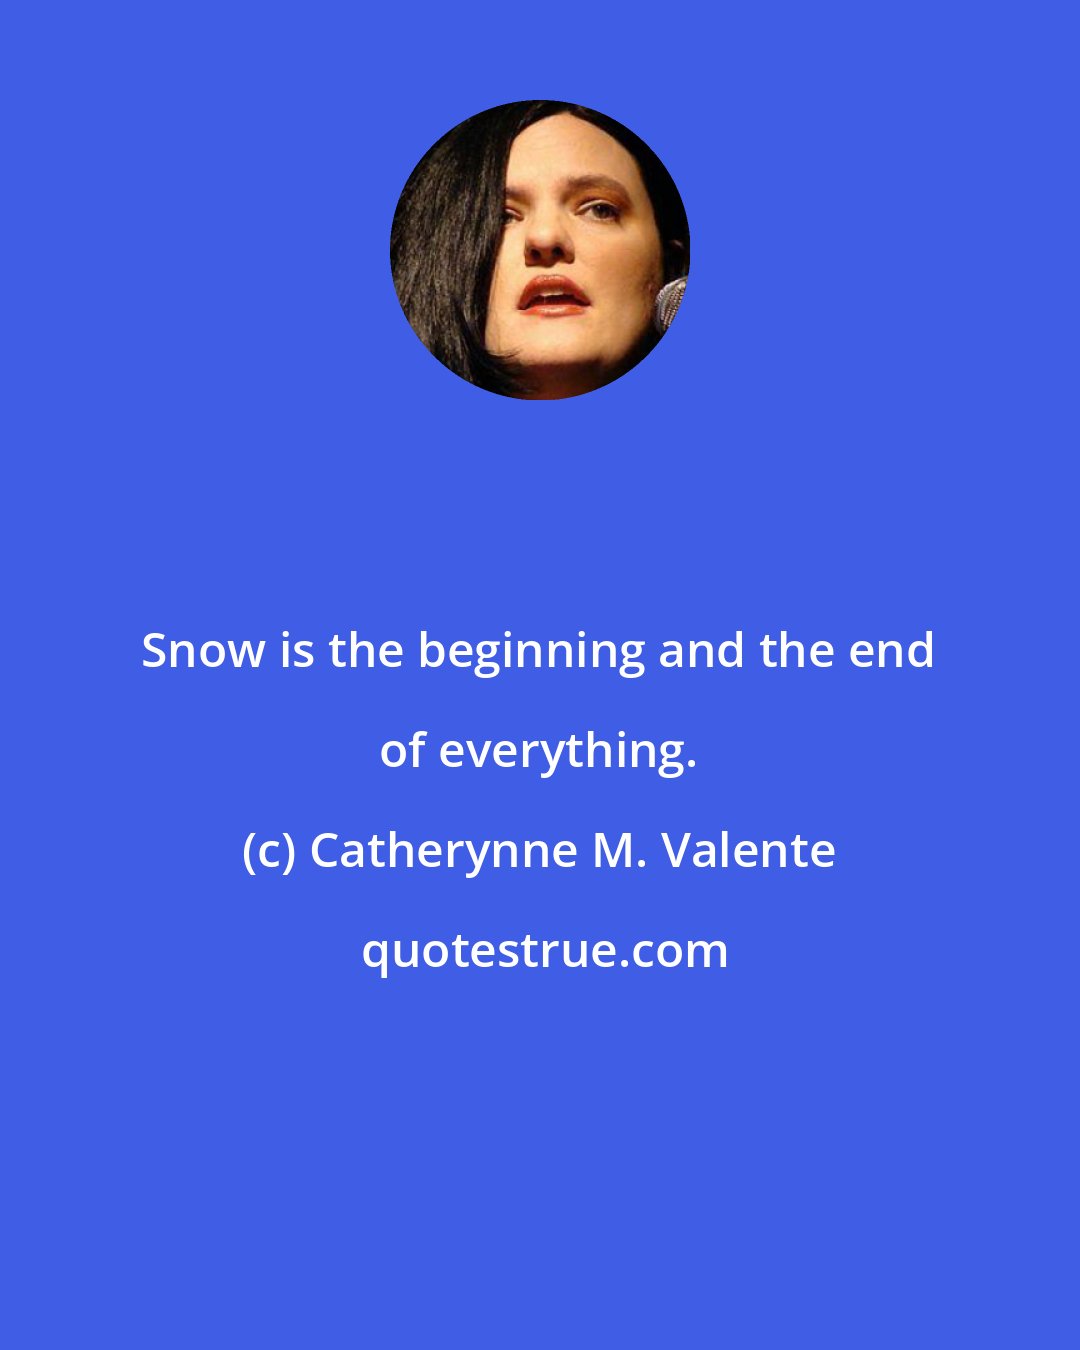 Catherynne M. Valente: Snow is the beginning and the end of everything.